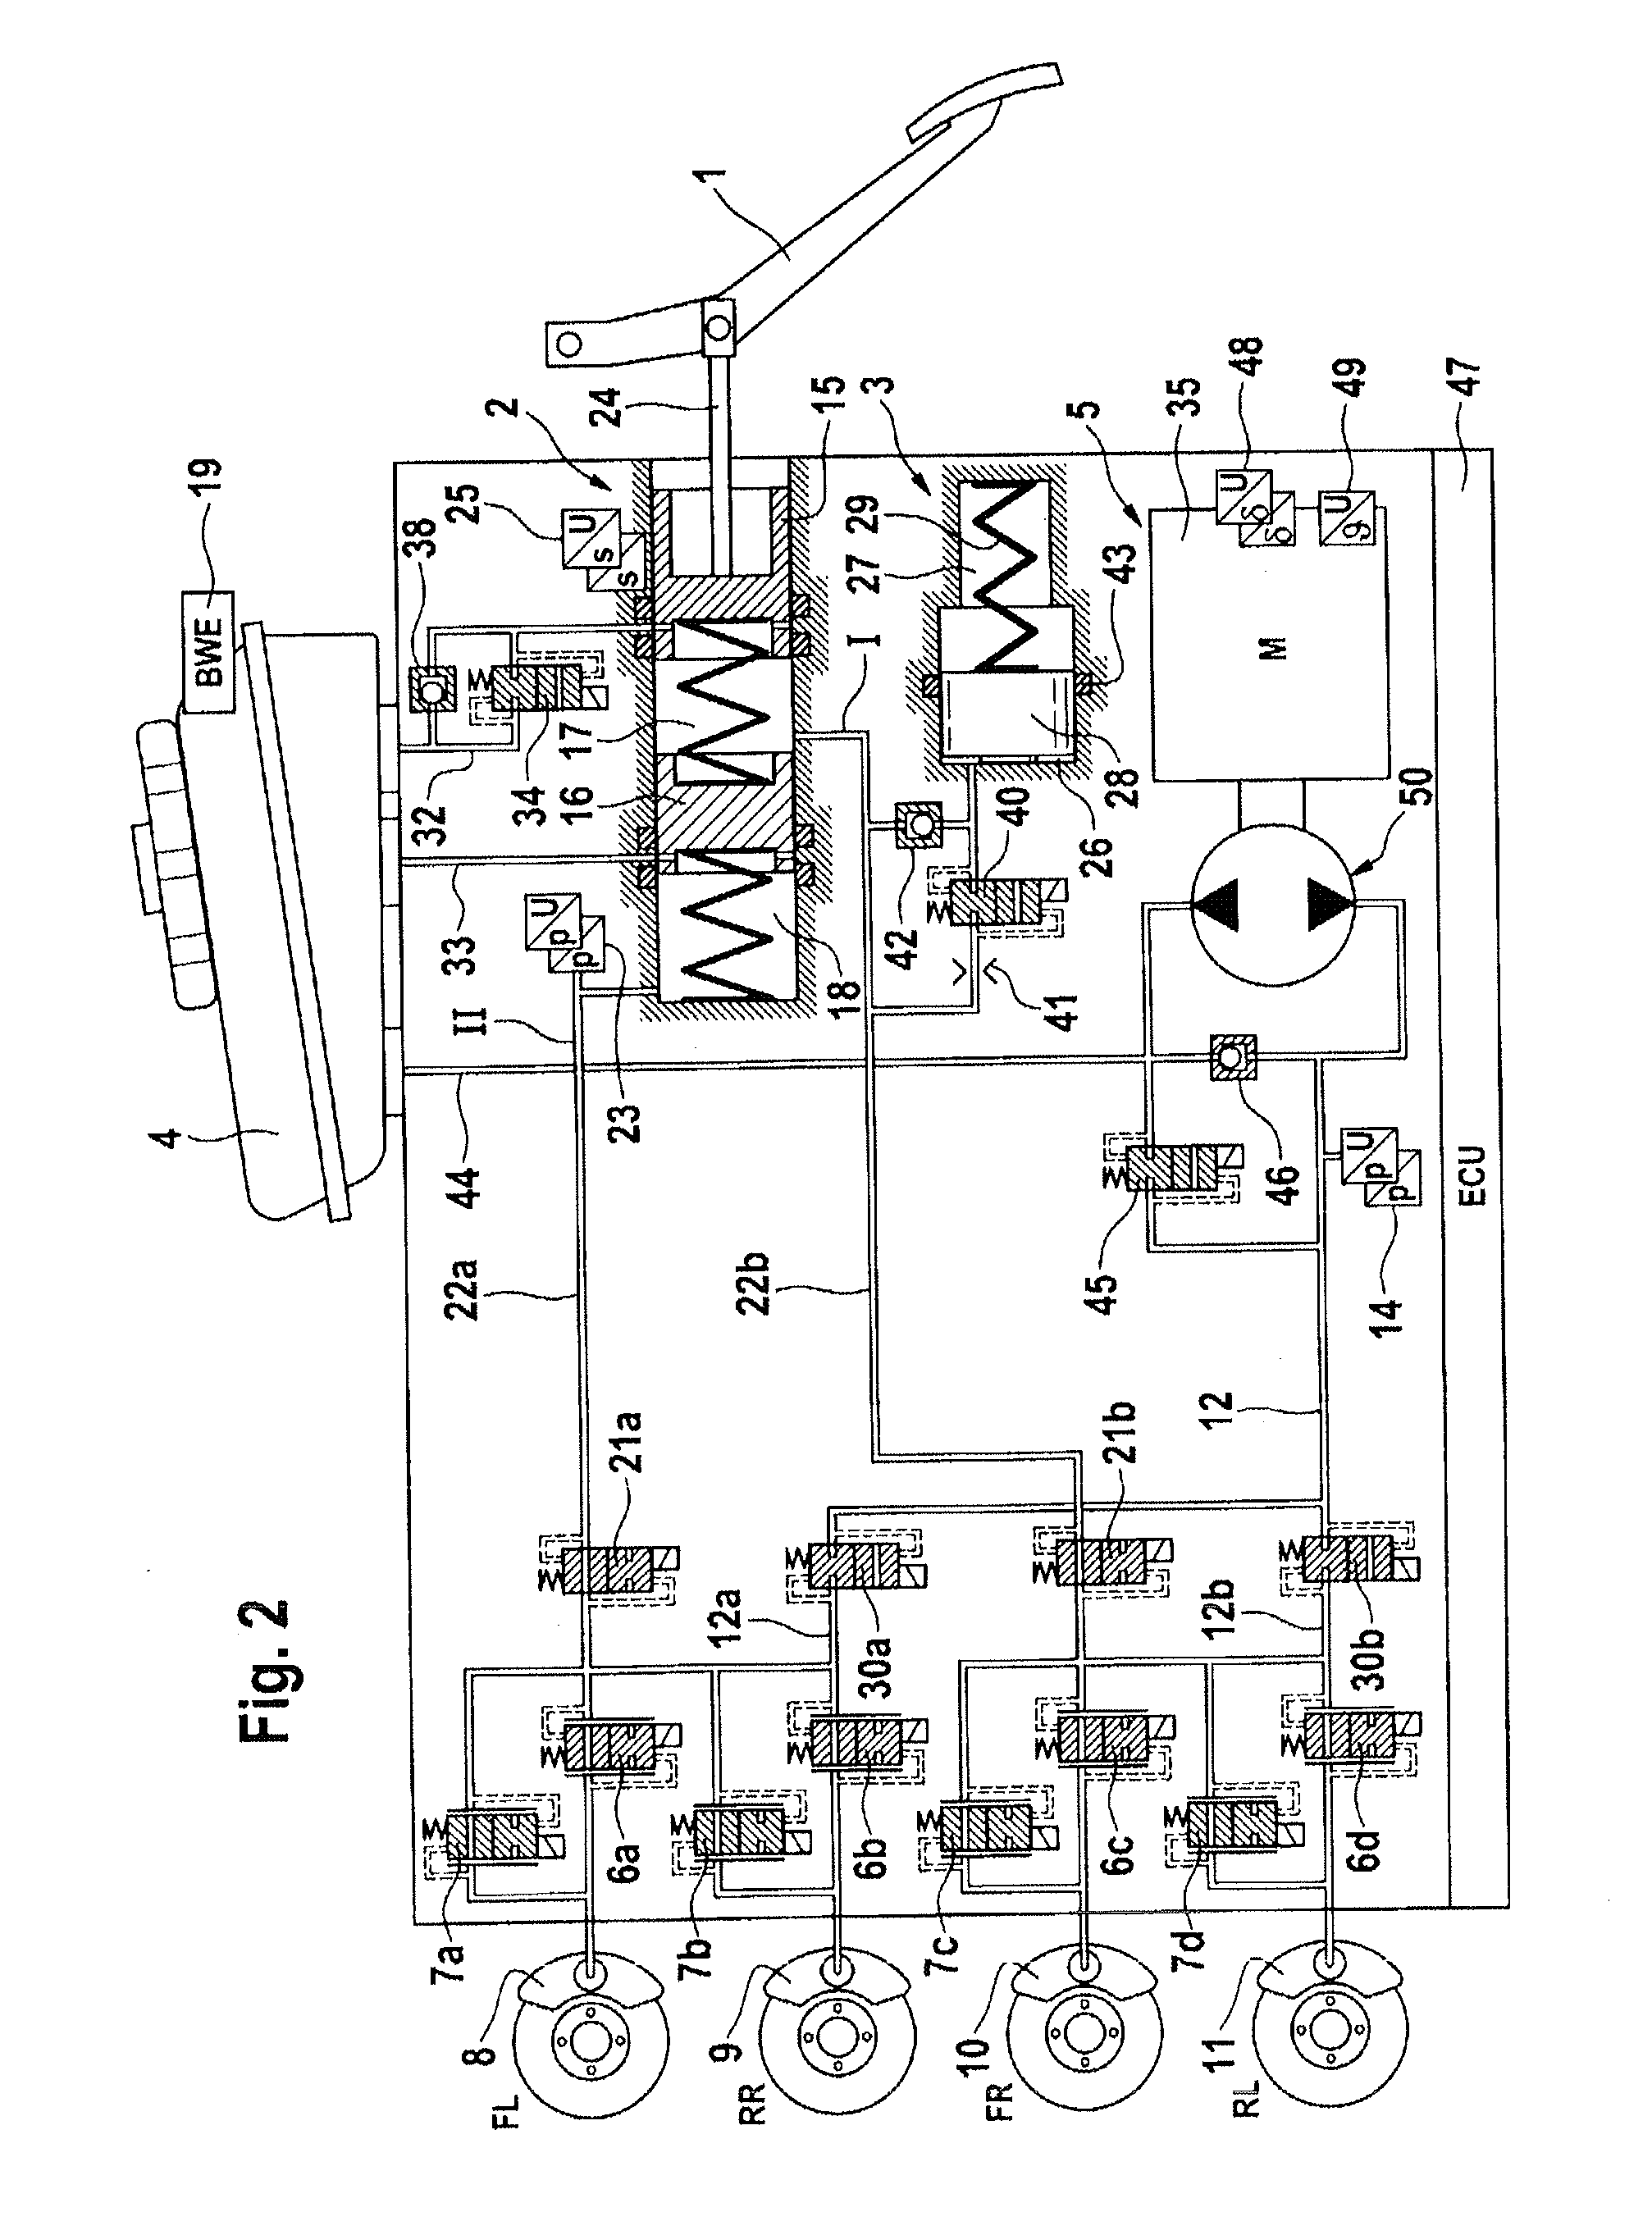 Method for operating a brake system and a brake system